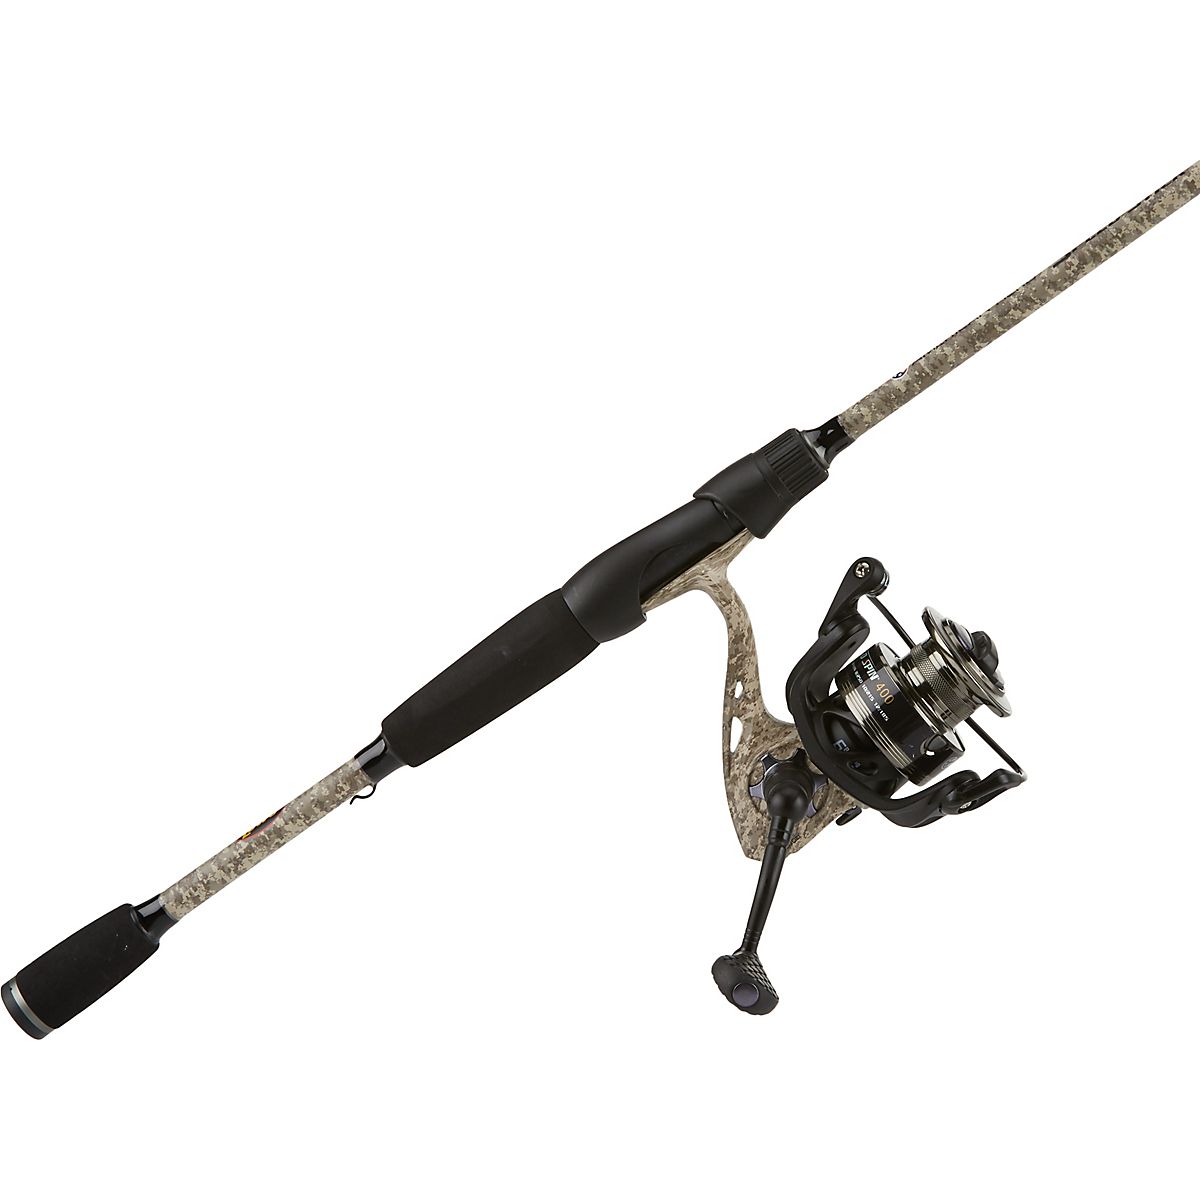 Lew's American Hero Camo Speed Spin 7 ft M Freshwater Spinning Rod